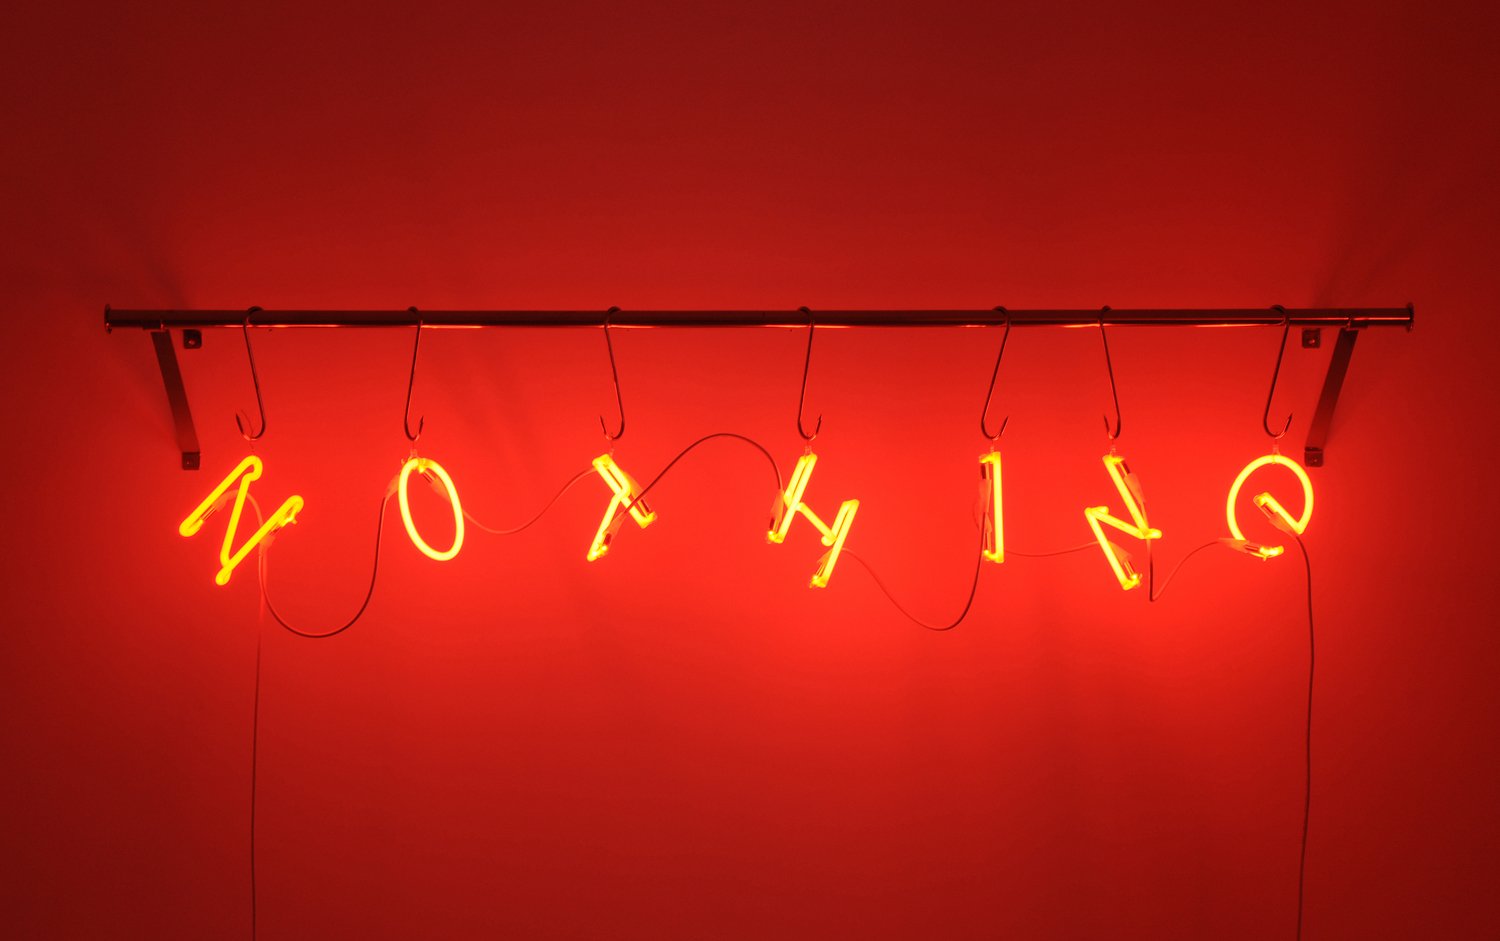 Red Nothing, 2007, stainless steel and luminous neon, 200 x 40 x 37 cm 